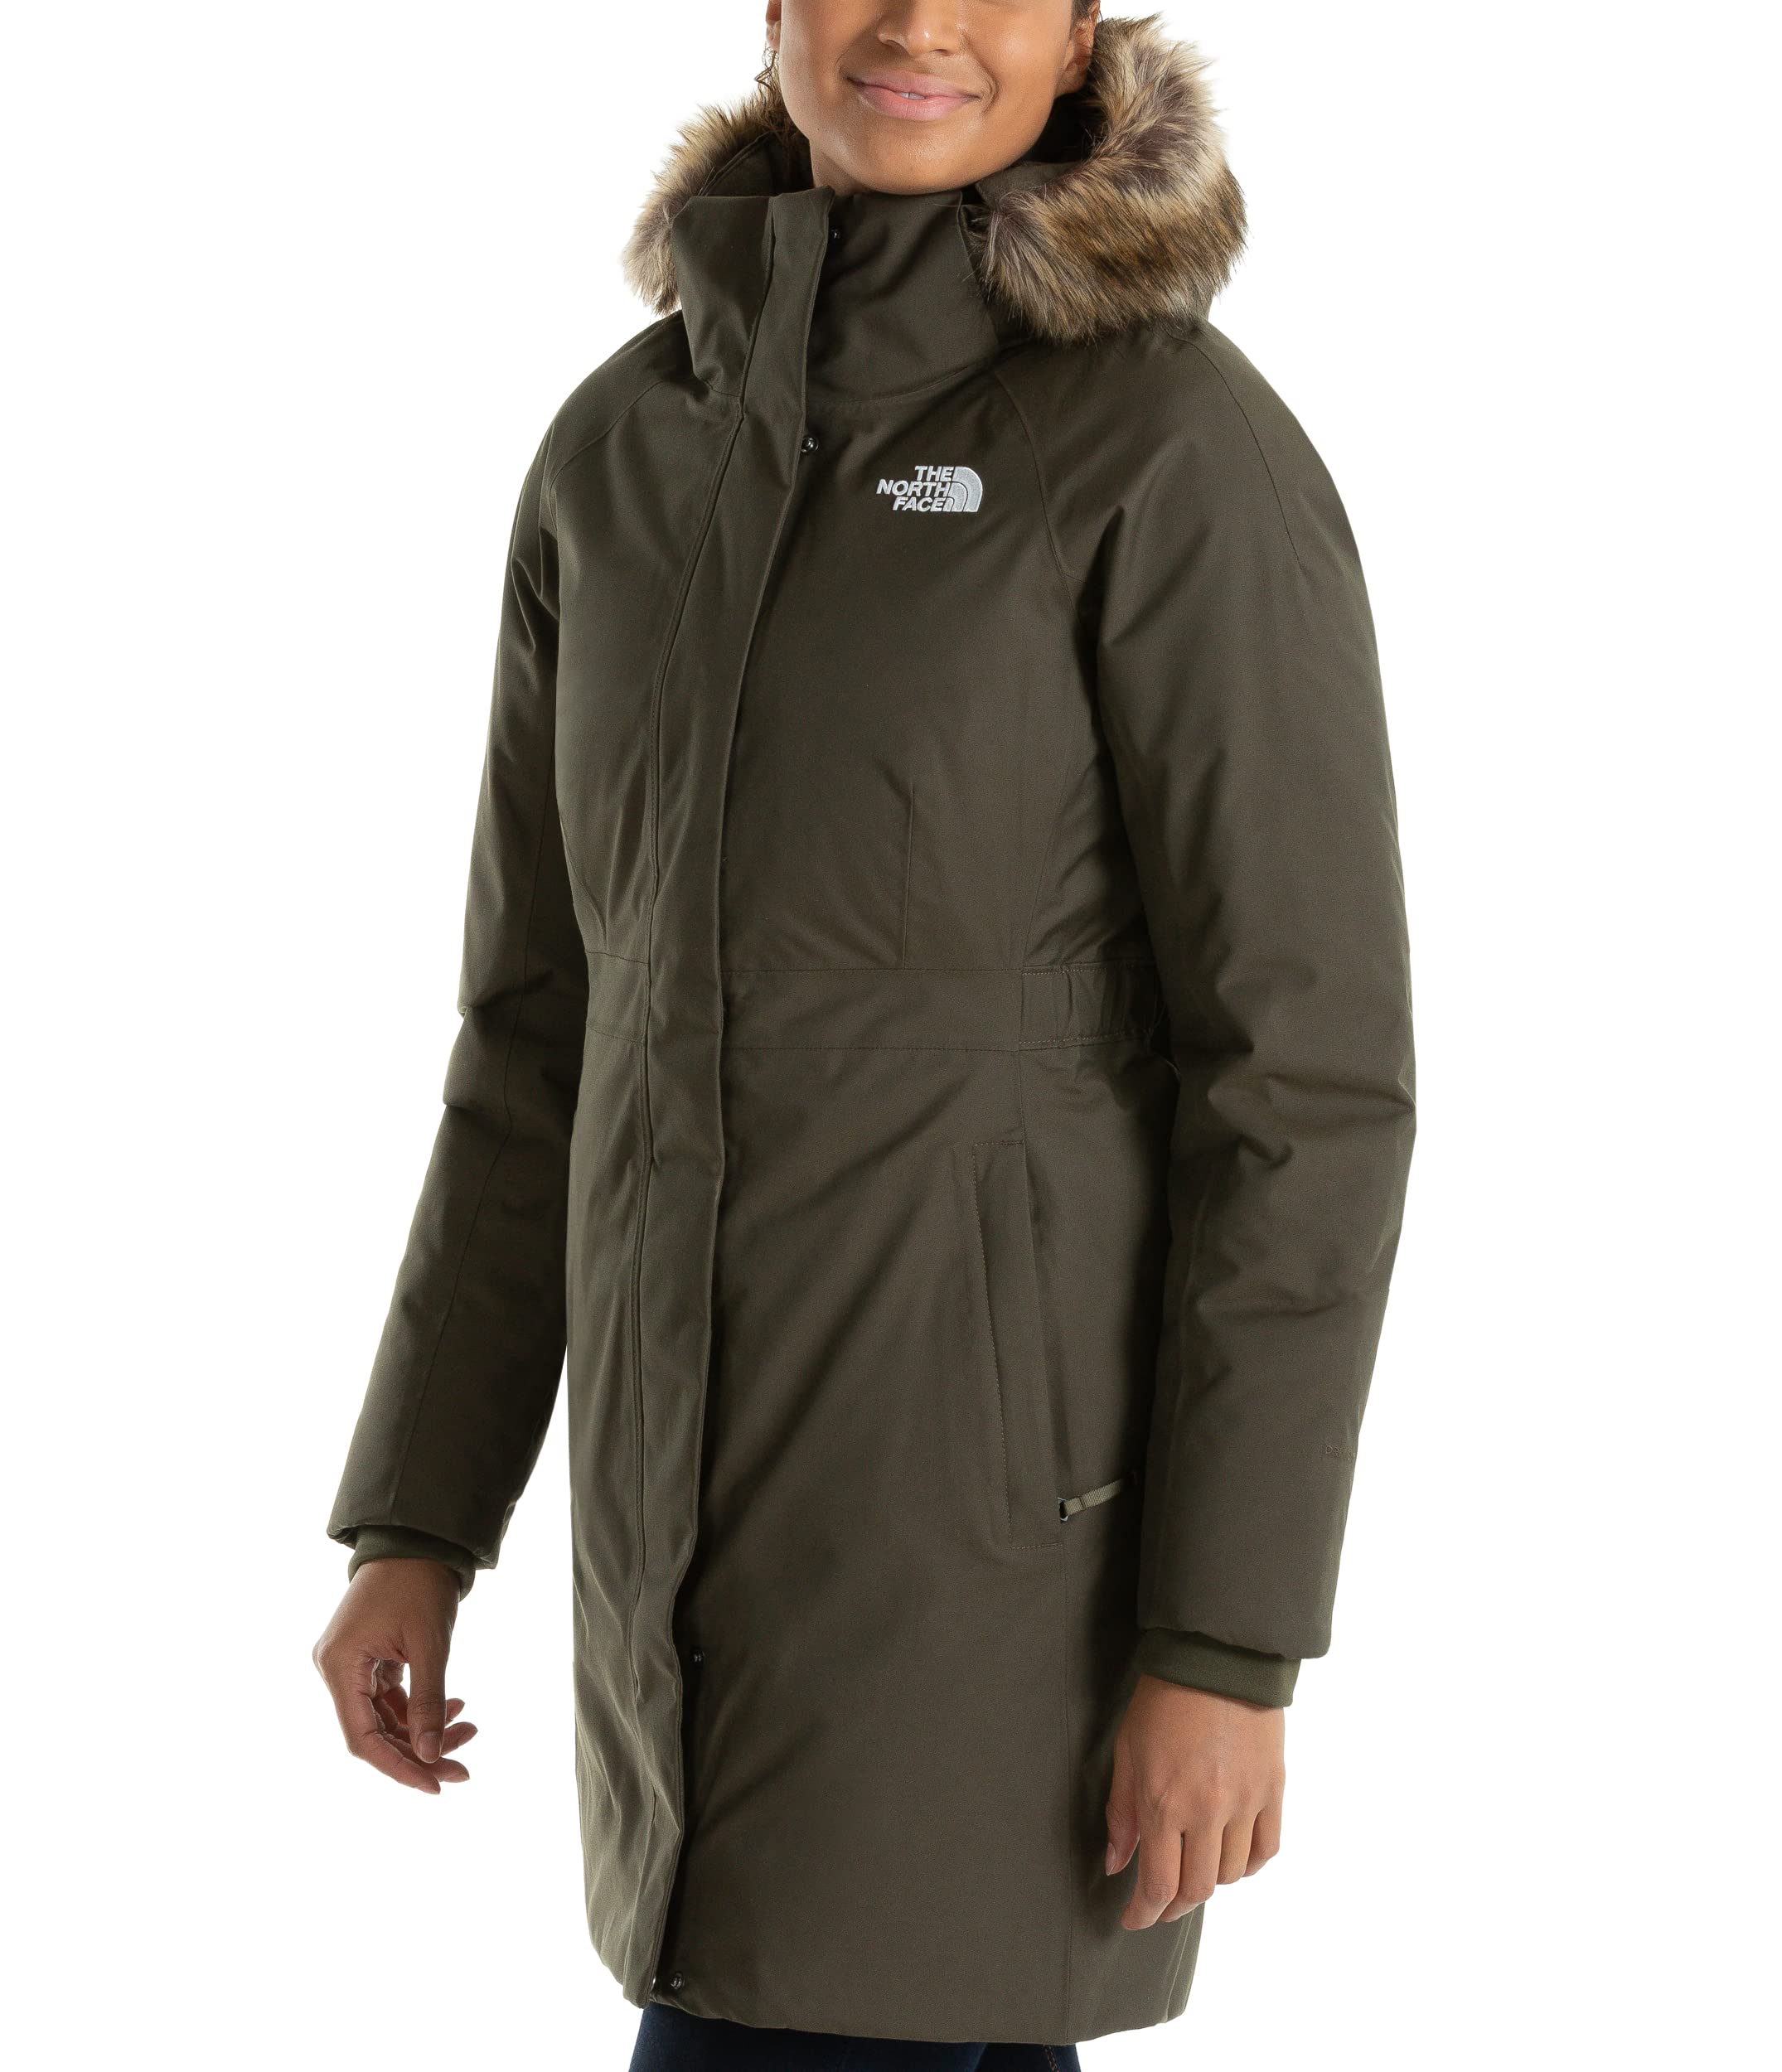 THE NORTH FACE Women’s Jump Down Parka